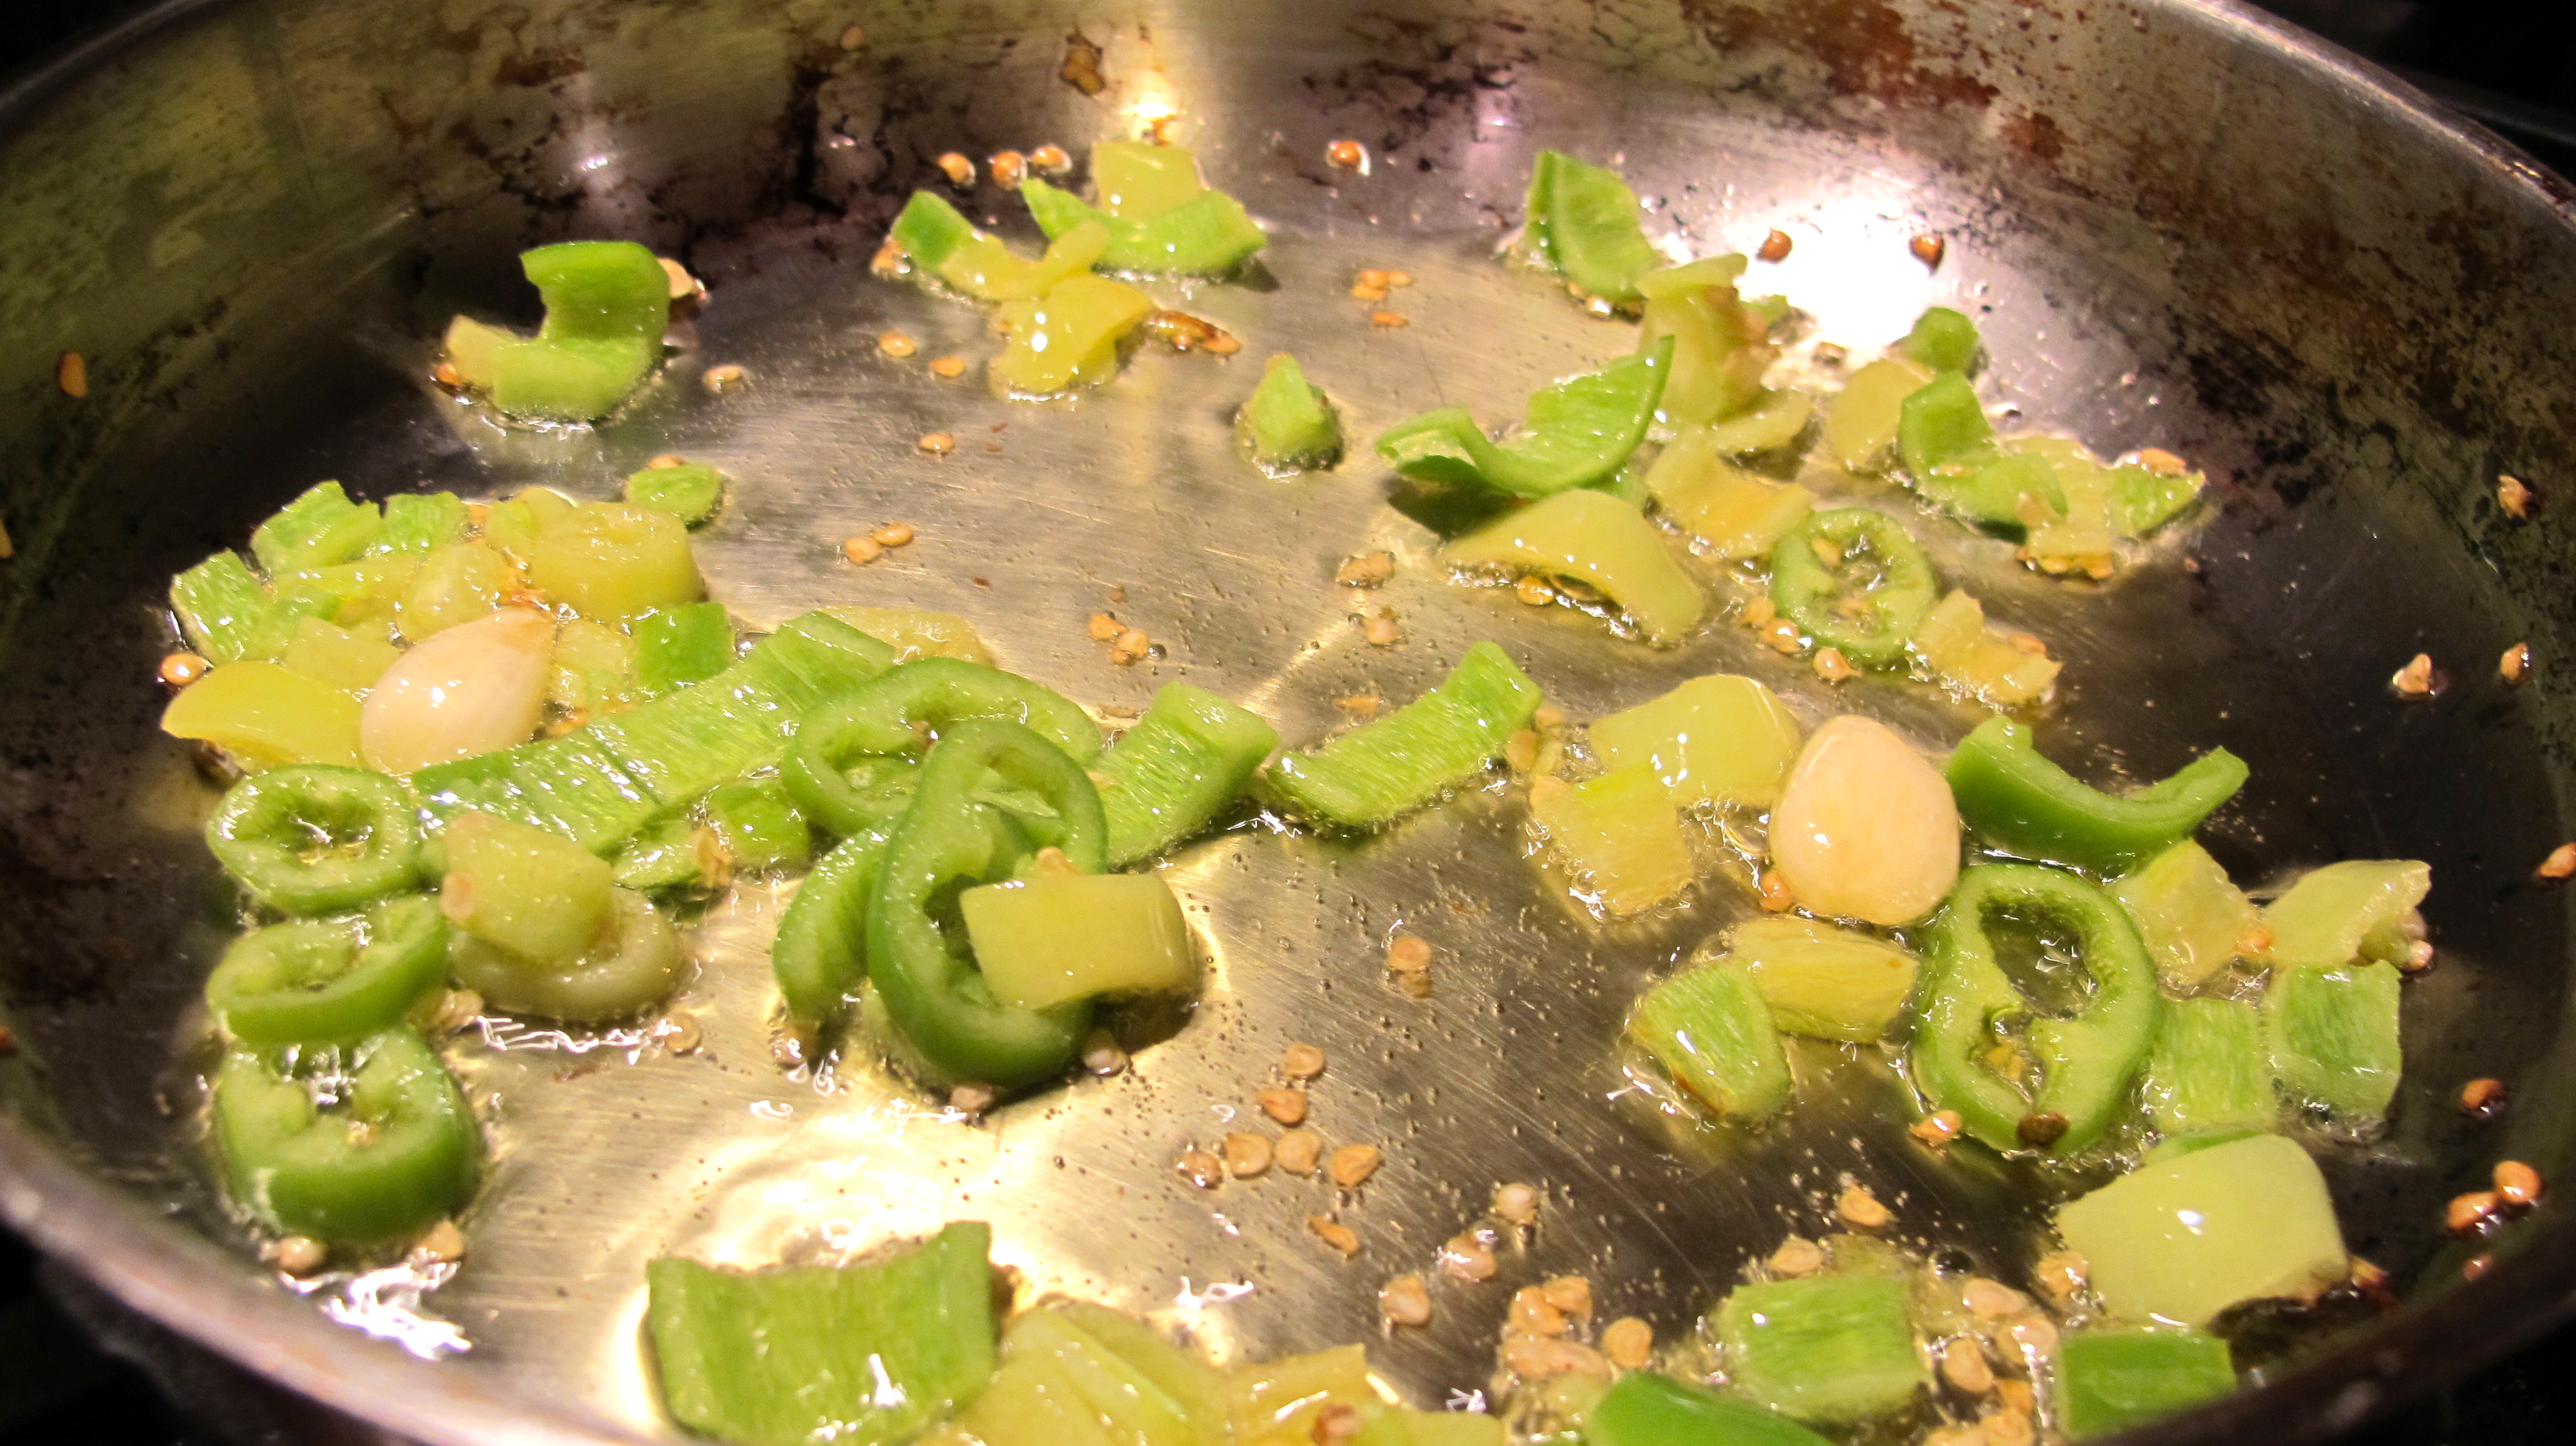 Sauté the green pepper in olive oil with garlic. 